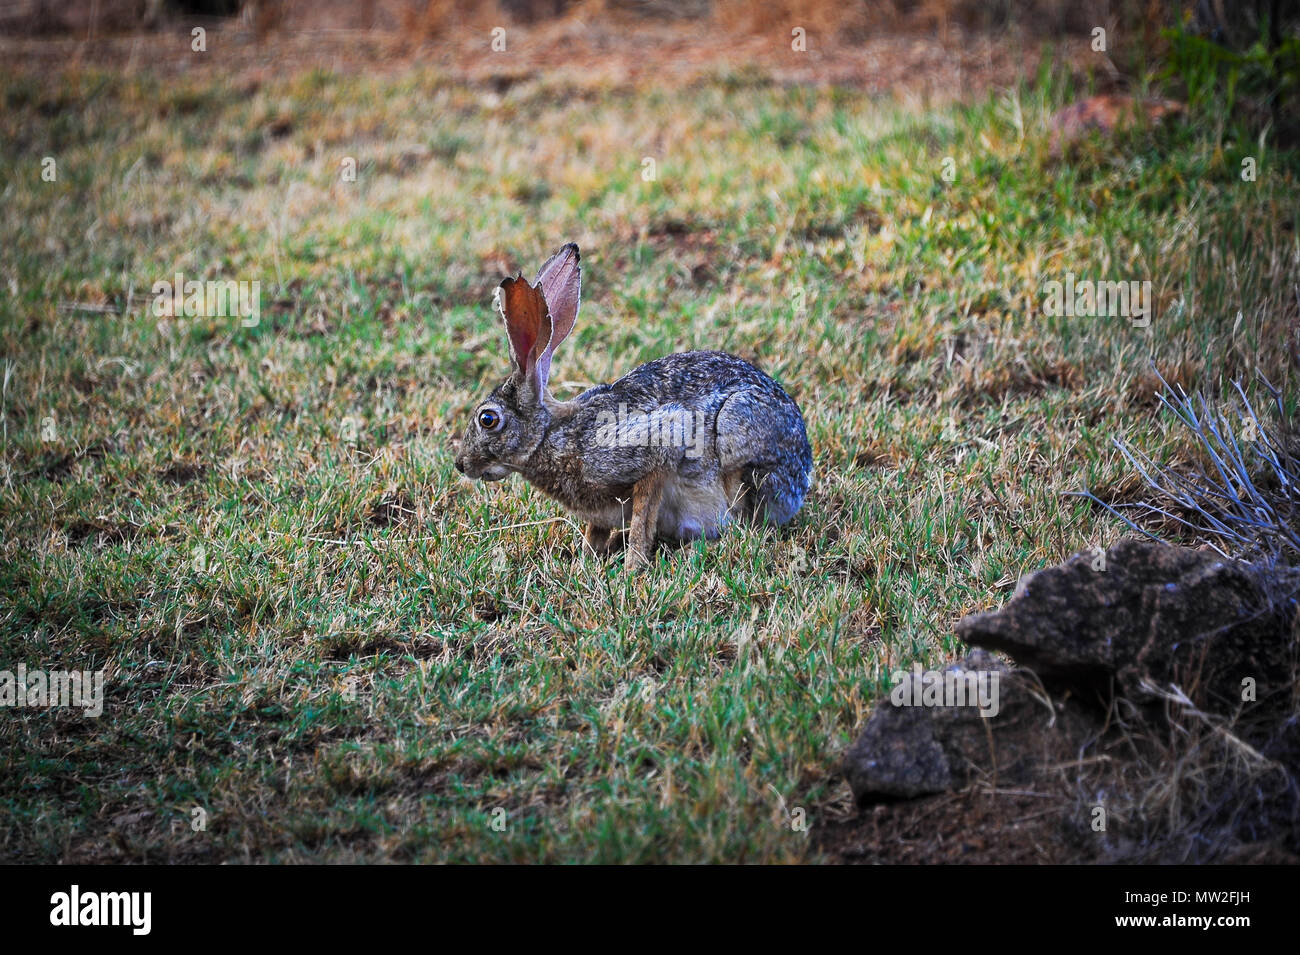 Portrait of a Cape Hare (Lepus capensis) in grassland at dusk, Stock Photo